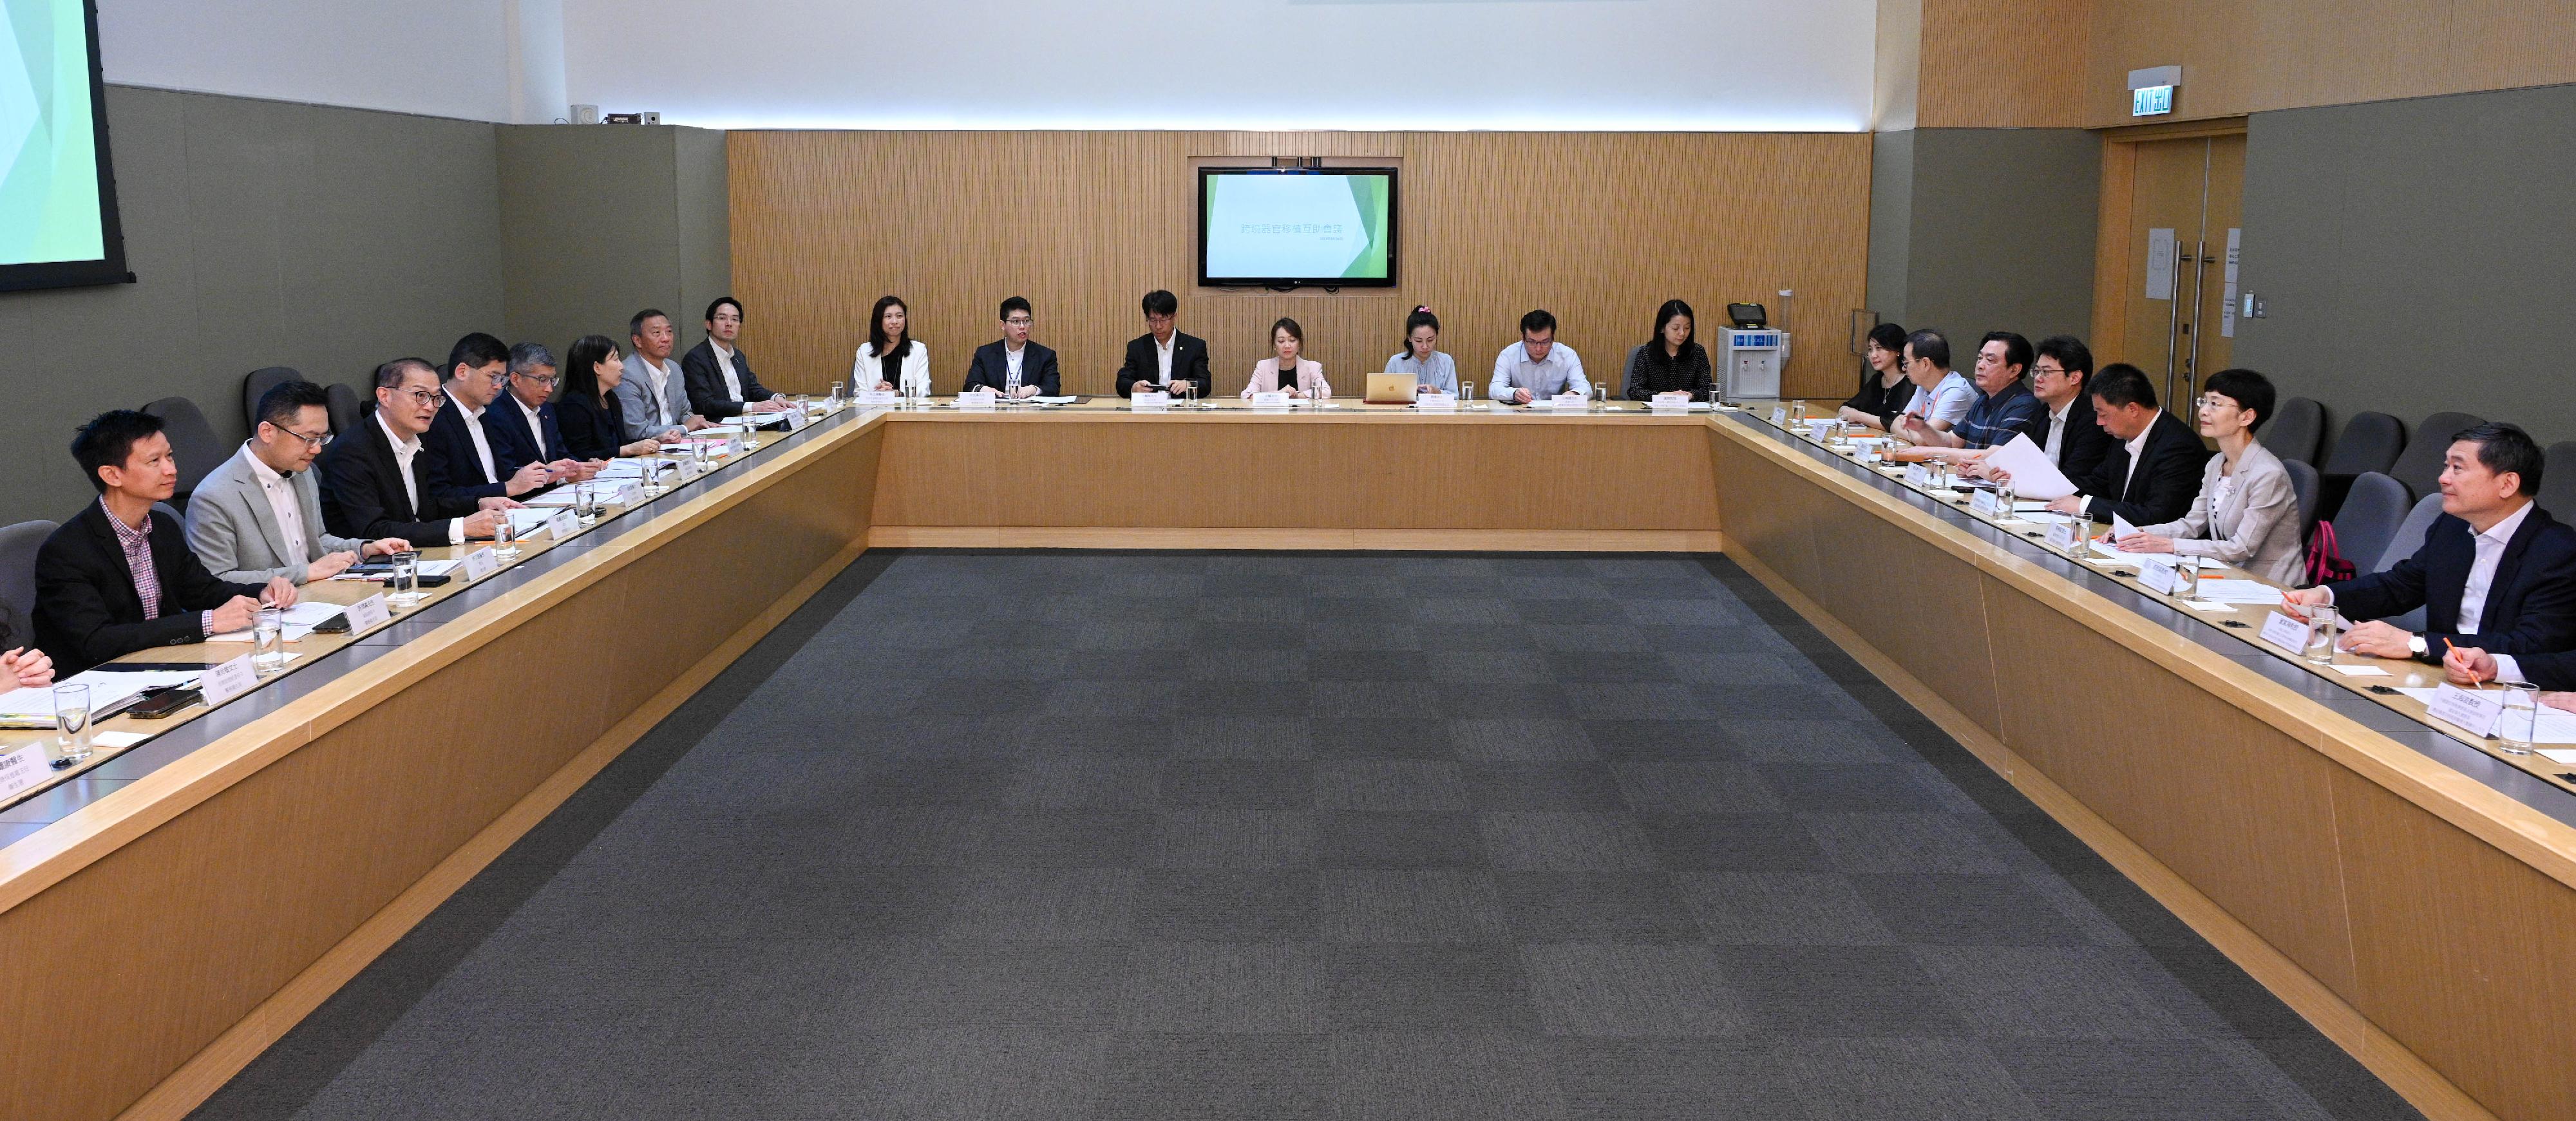 The Secretary for Health, Professor Lo Chung-mau (third left), meets with a delegation led by the Director-General of the Department of Medical Emergency Response of the National Health Commission, Ms Guo Yanhong (second right), at the Central Government Offices today (August 26) to exchange views and have discussion on the collaboration with the Mainland in the realm of organ transplantation. The Director of Health, Dr Ronald Lam (second left); Deputy Secretary for Health Mr Sam Hui (first left); and the Chief Executive of the Hospital Authority, Dr Tony Ko (fourth left), also attend the meeting.